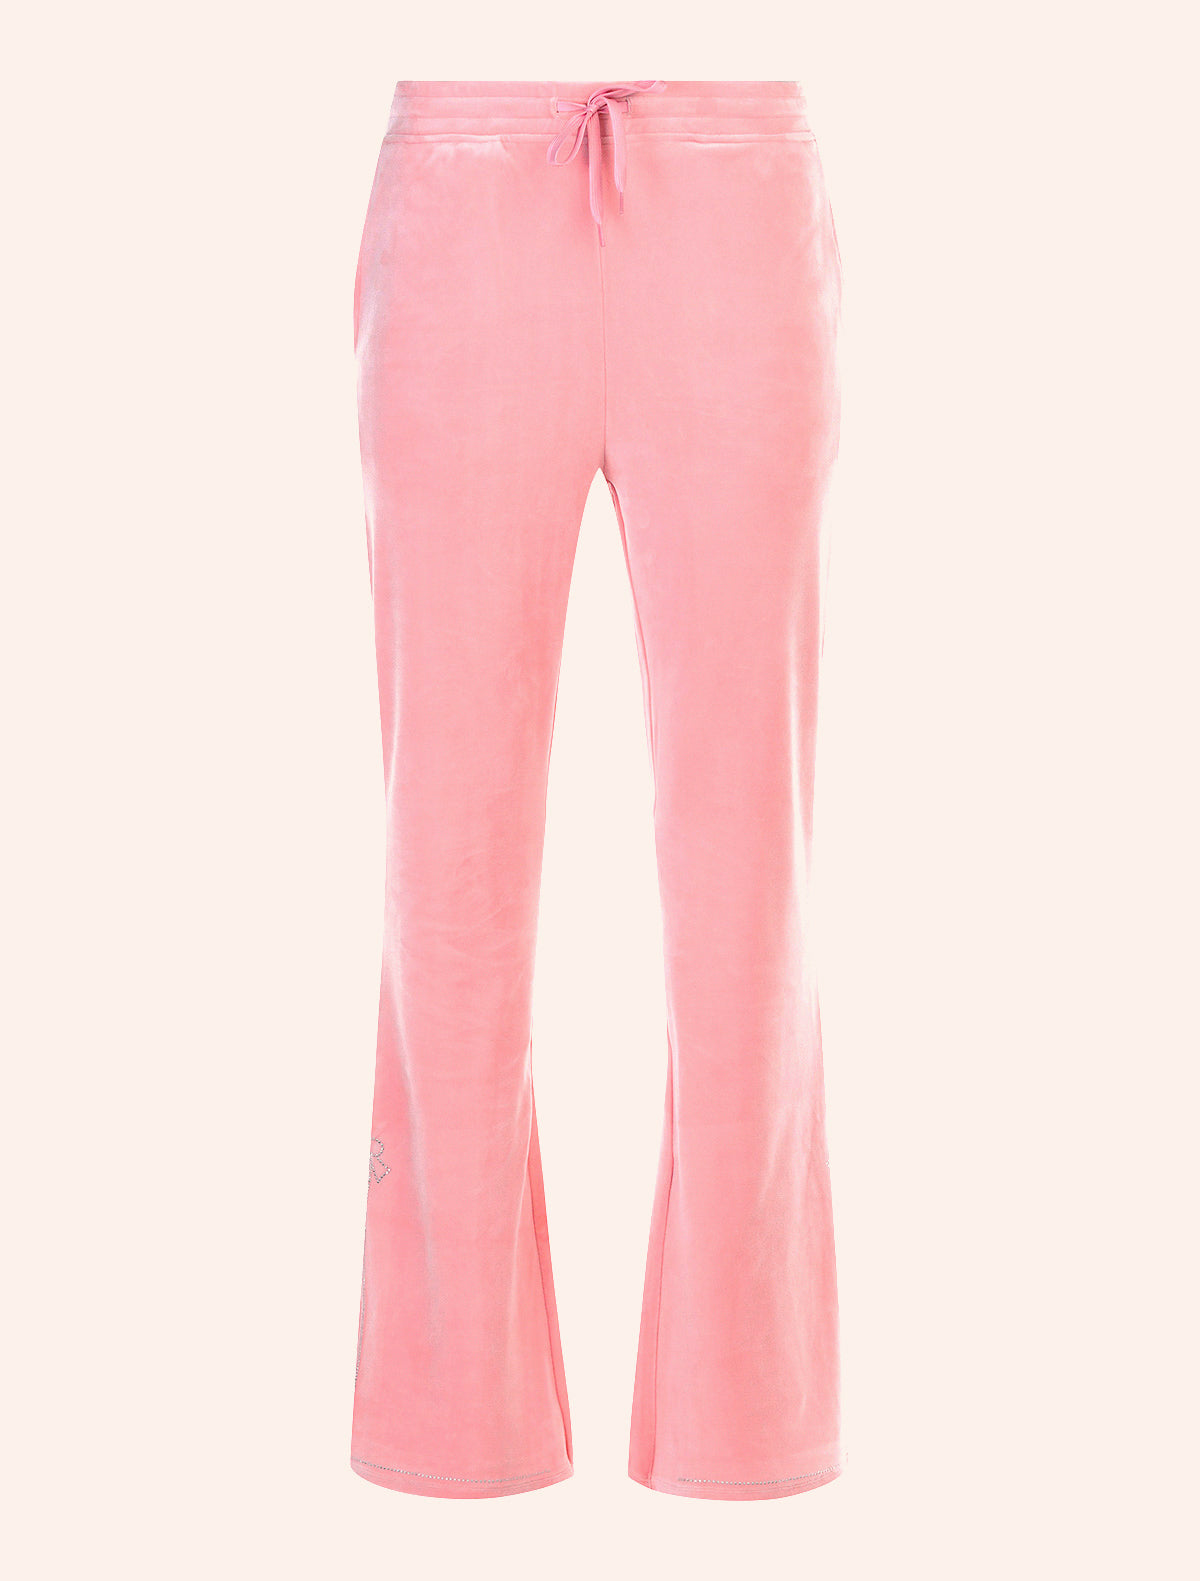 Crystal Bow Pant by Paris Hilton Tracksuits